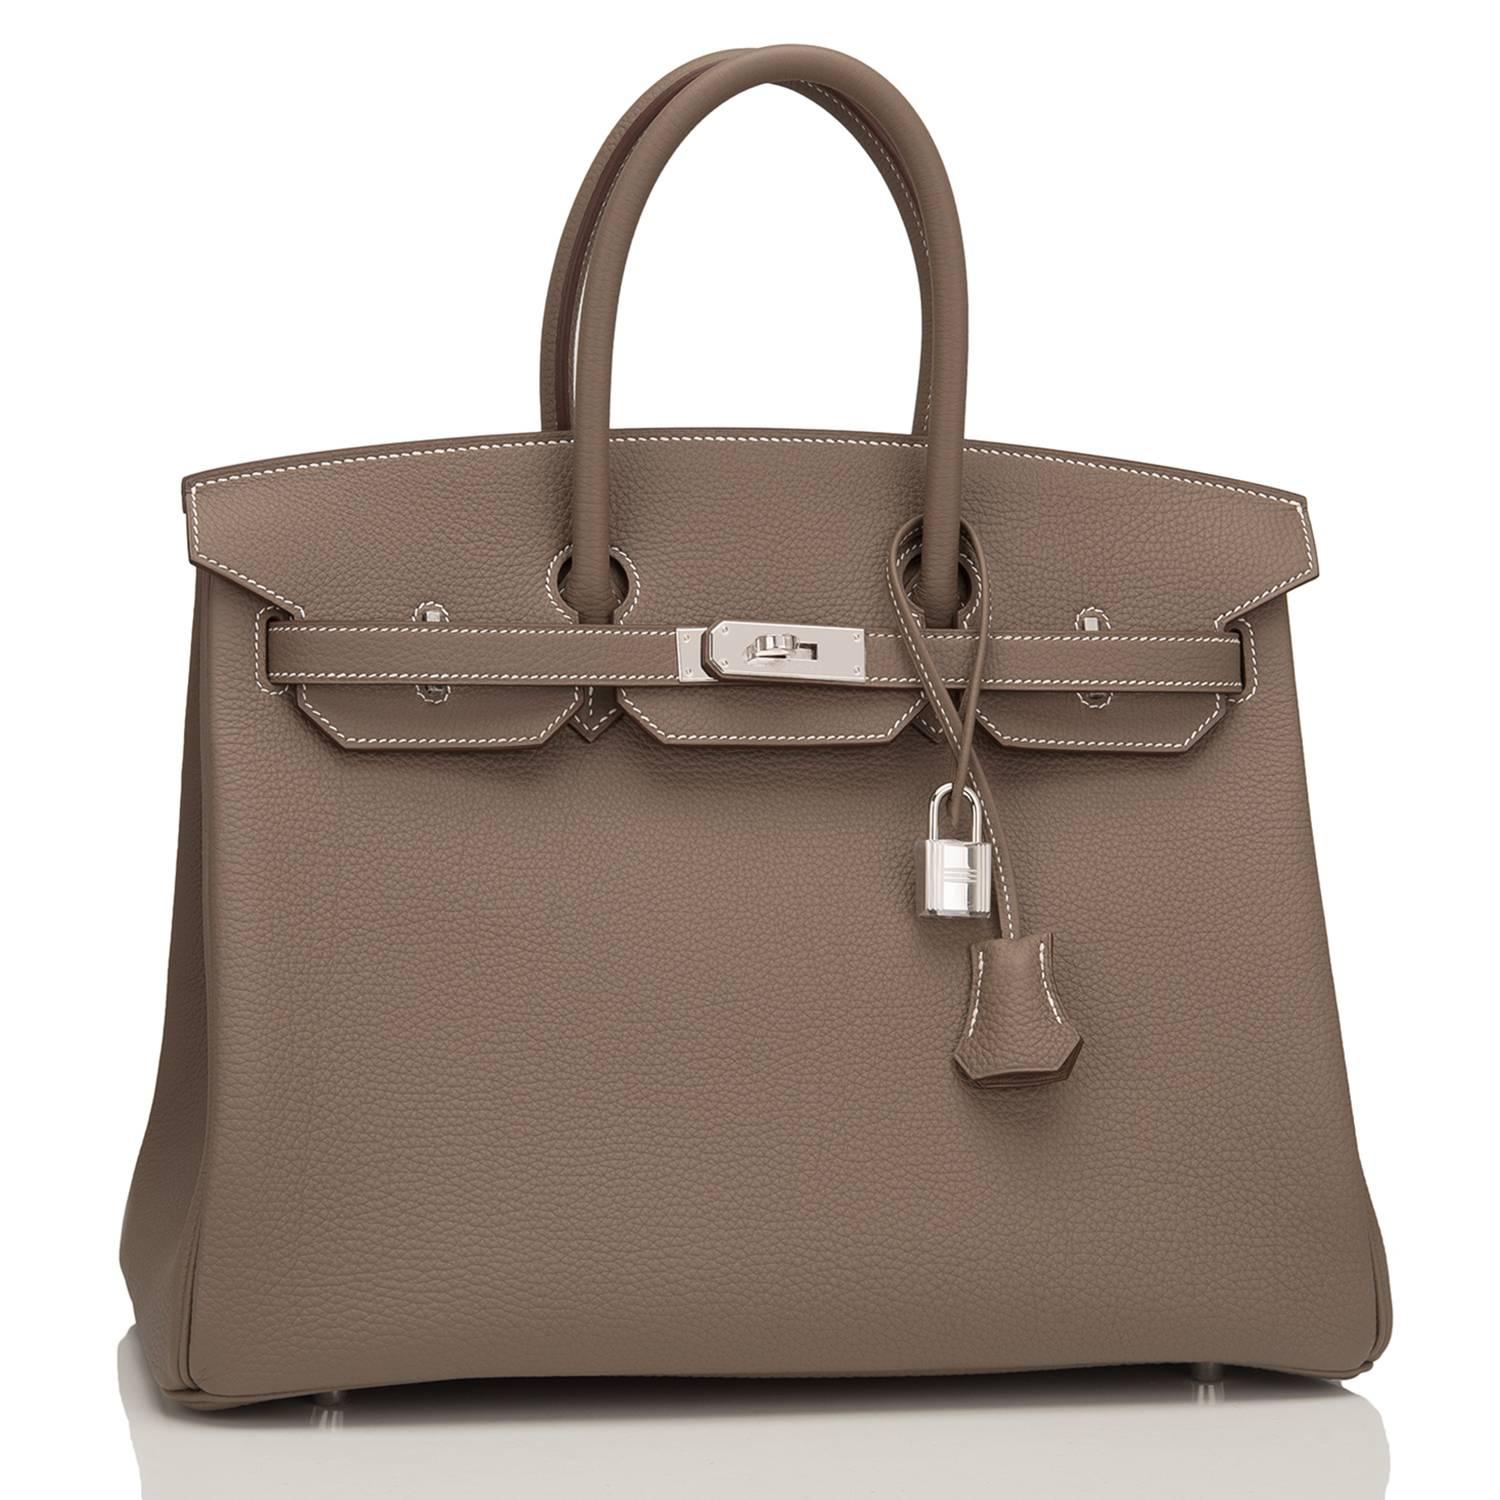 Hermes Etoupe Birkin 35cm of togo leather with palladium hardware.

This Birkin has white contrast stitching, a front toggle closure, a clochette with lock and two keys, and double rolled handles.

The interior is lined with Etoupe chevre and